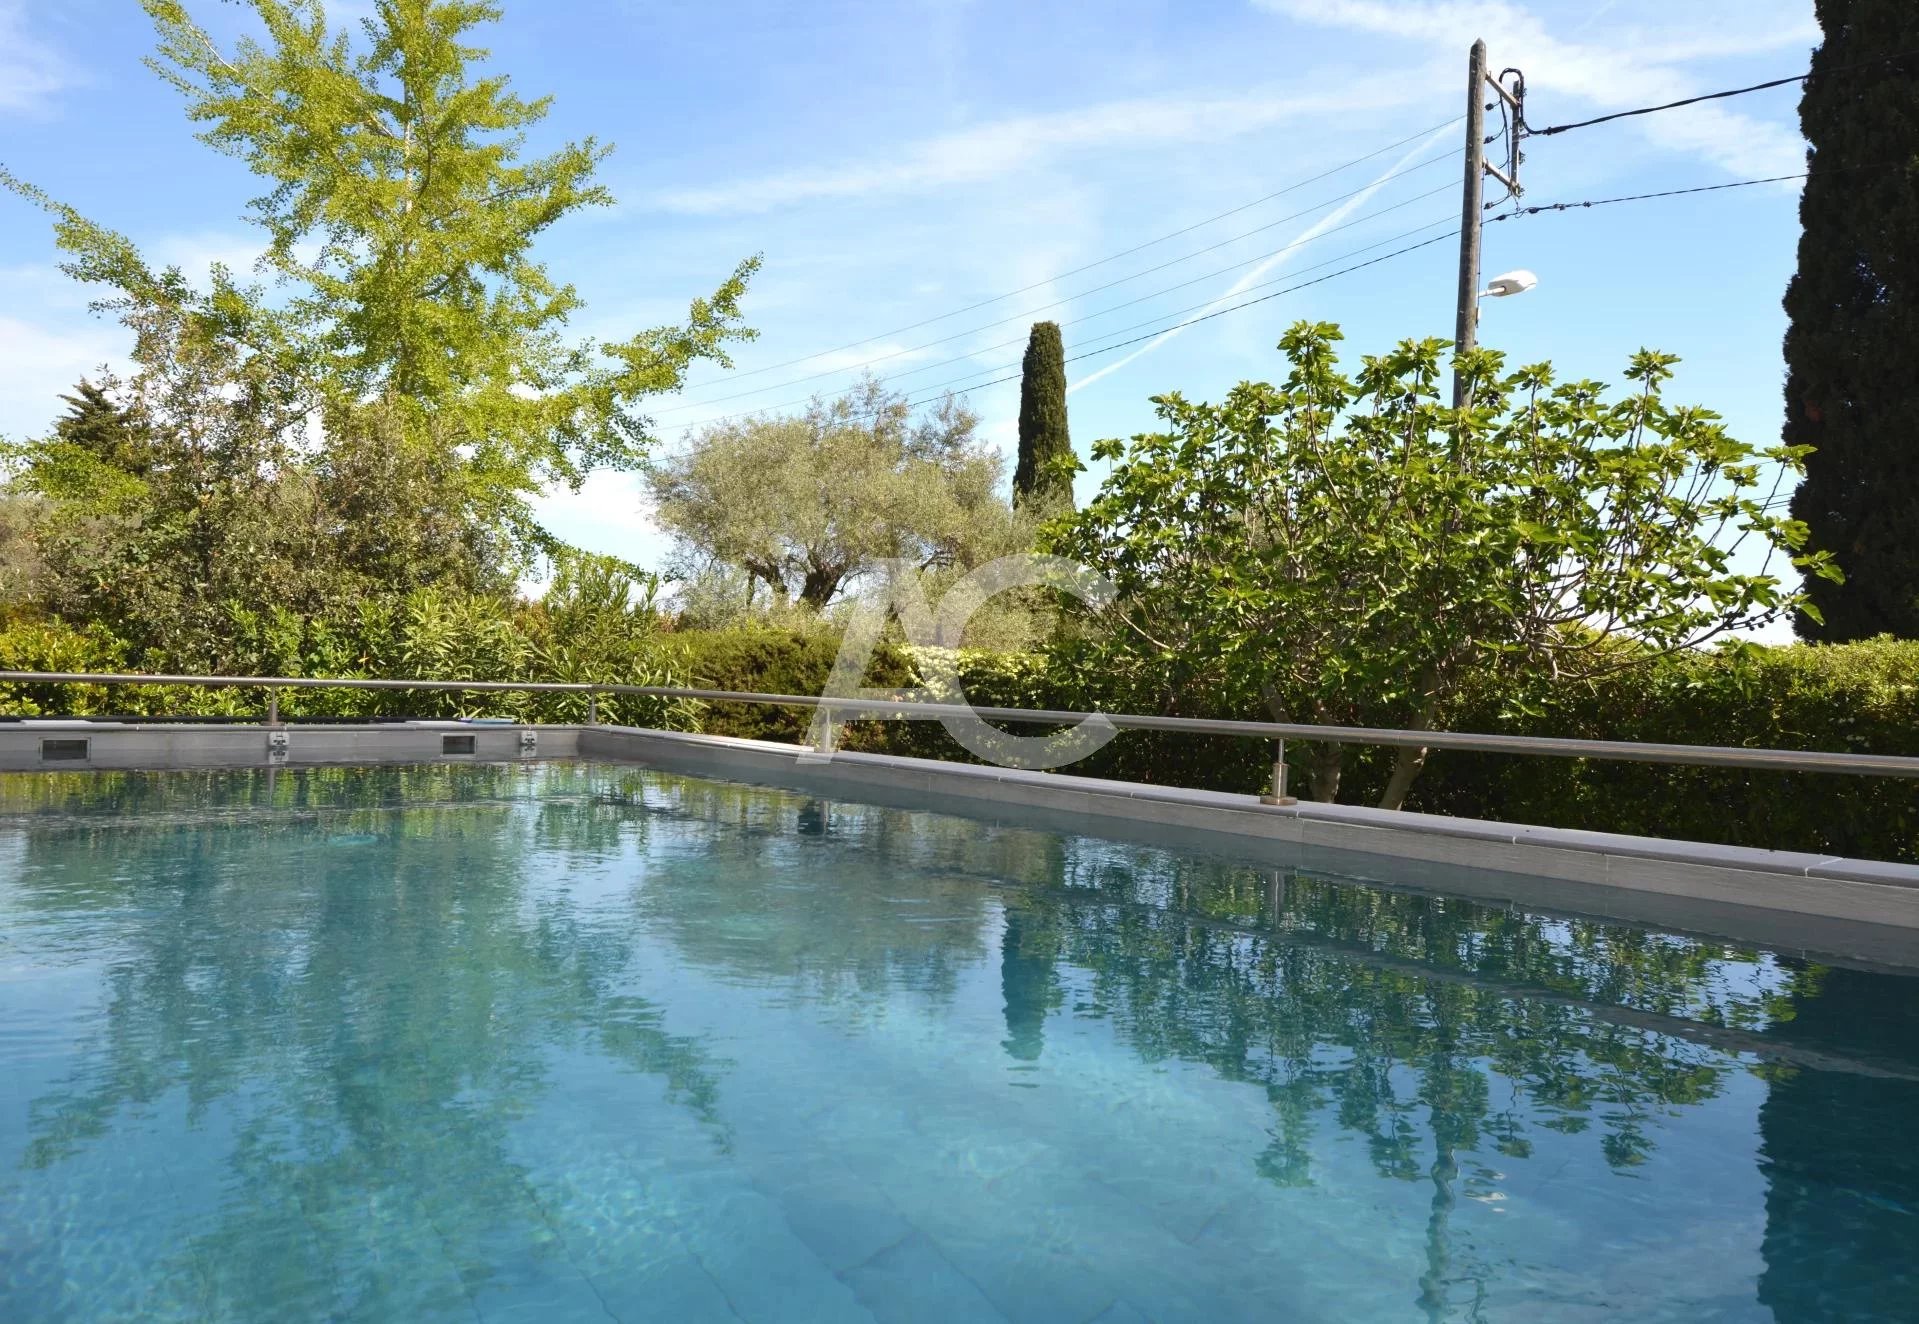 Beautiful villa within walking distance of the beaches - Cap d'Antibes